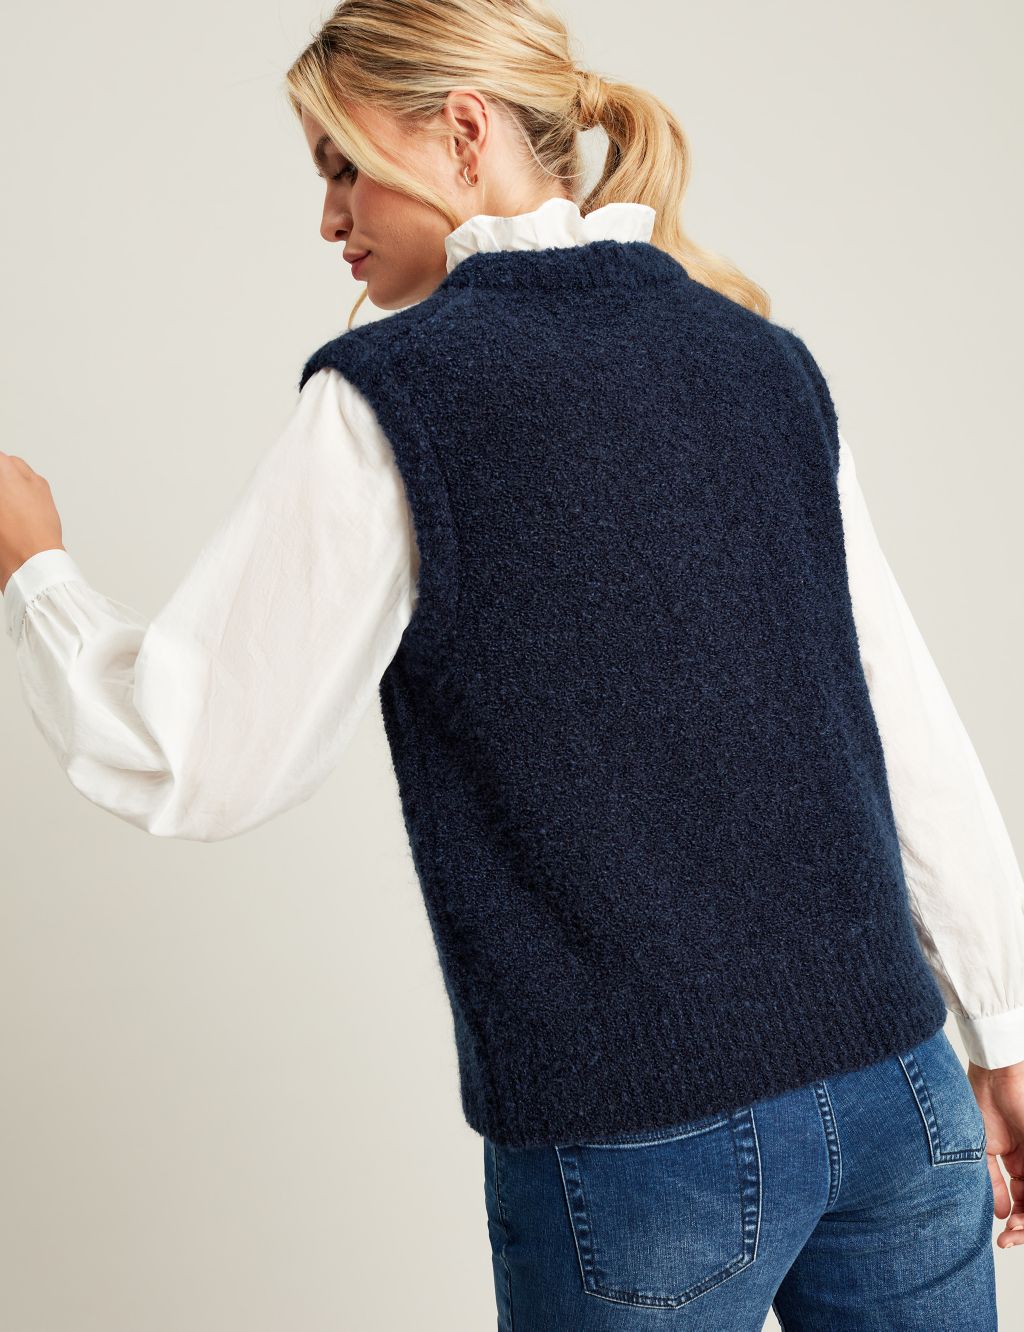 Textured Crew Neck Knitted Vest image 4